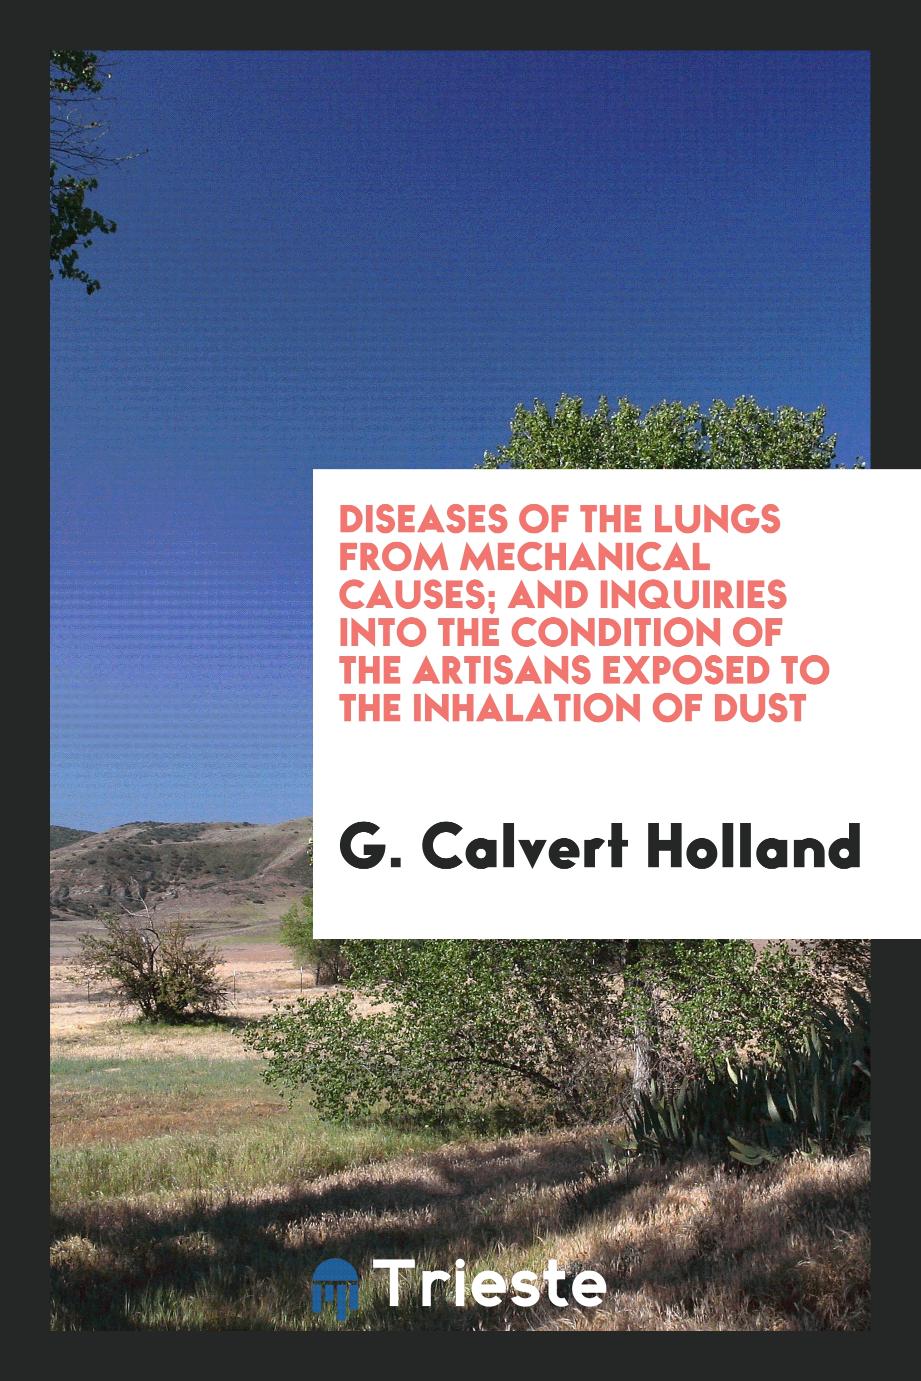 Diseases of the Lungs from Mechanical Causes; And Inquiries into the Condition of the Artisans Exposed to the Inhalation of Dust